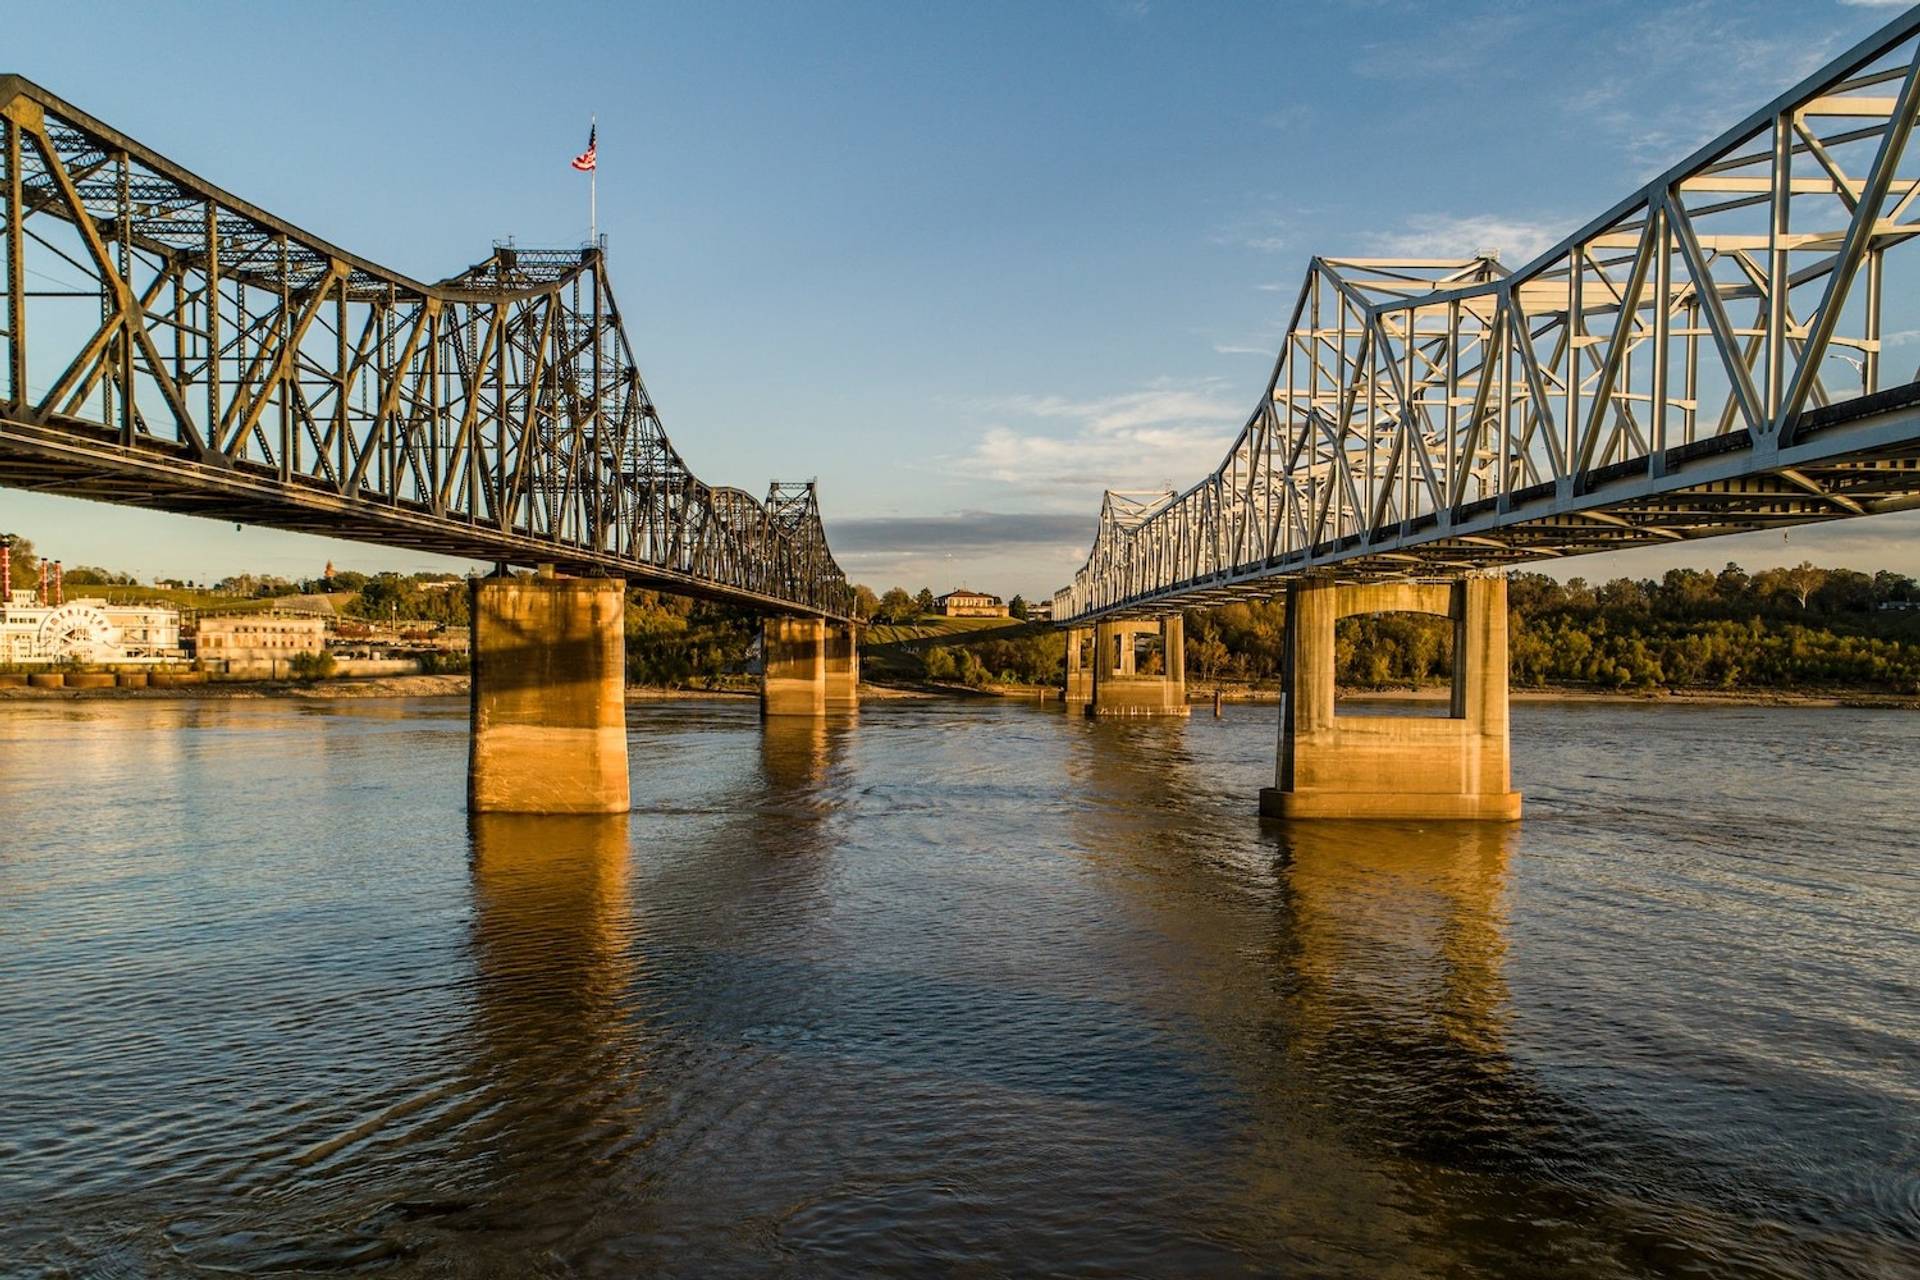 Two bridges in Vicksburg to represent where to buy e-bikes in Mississippi